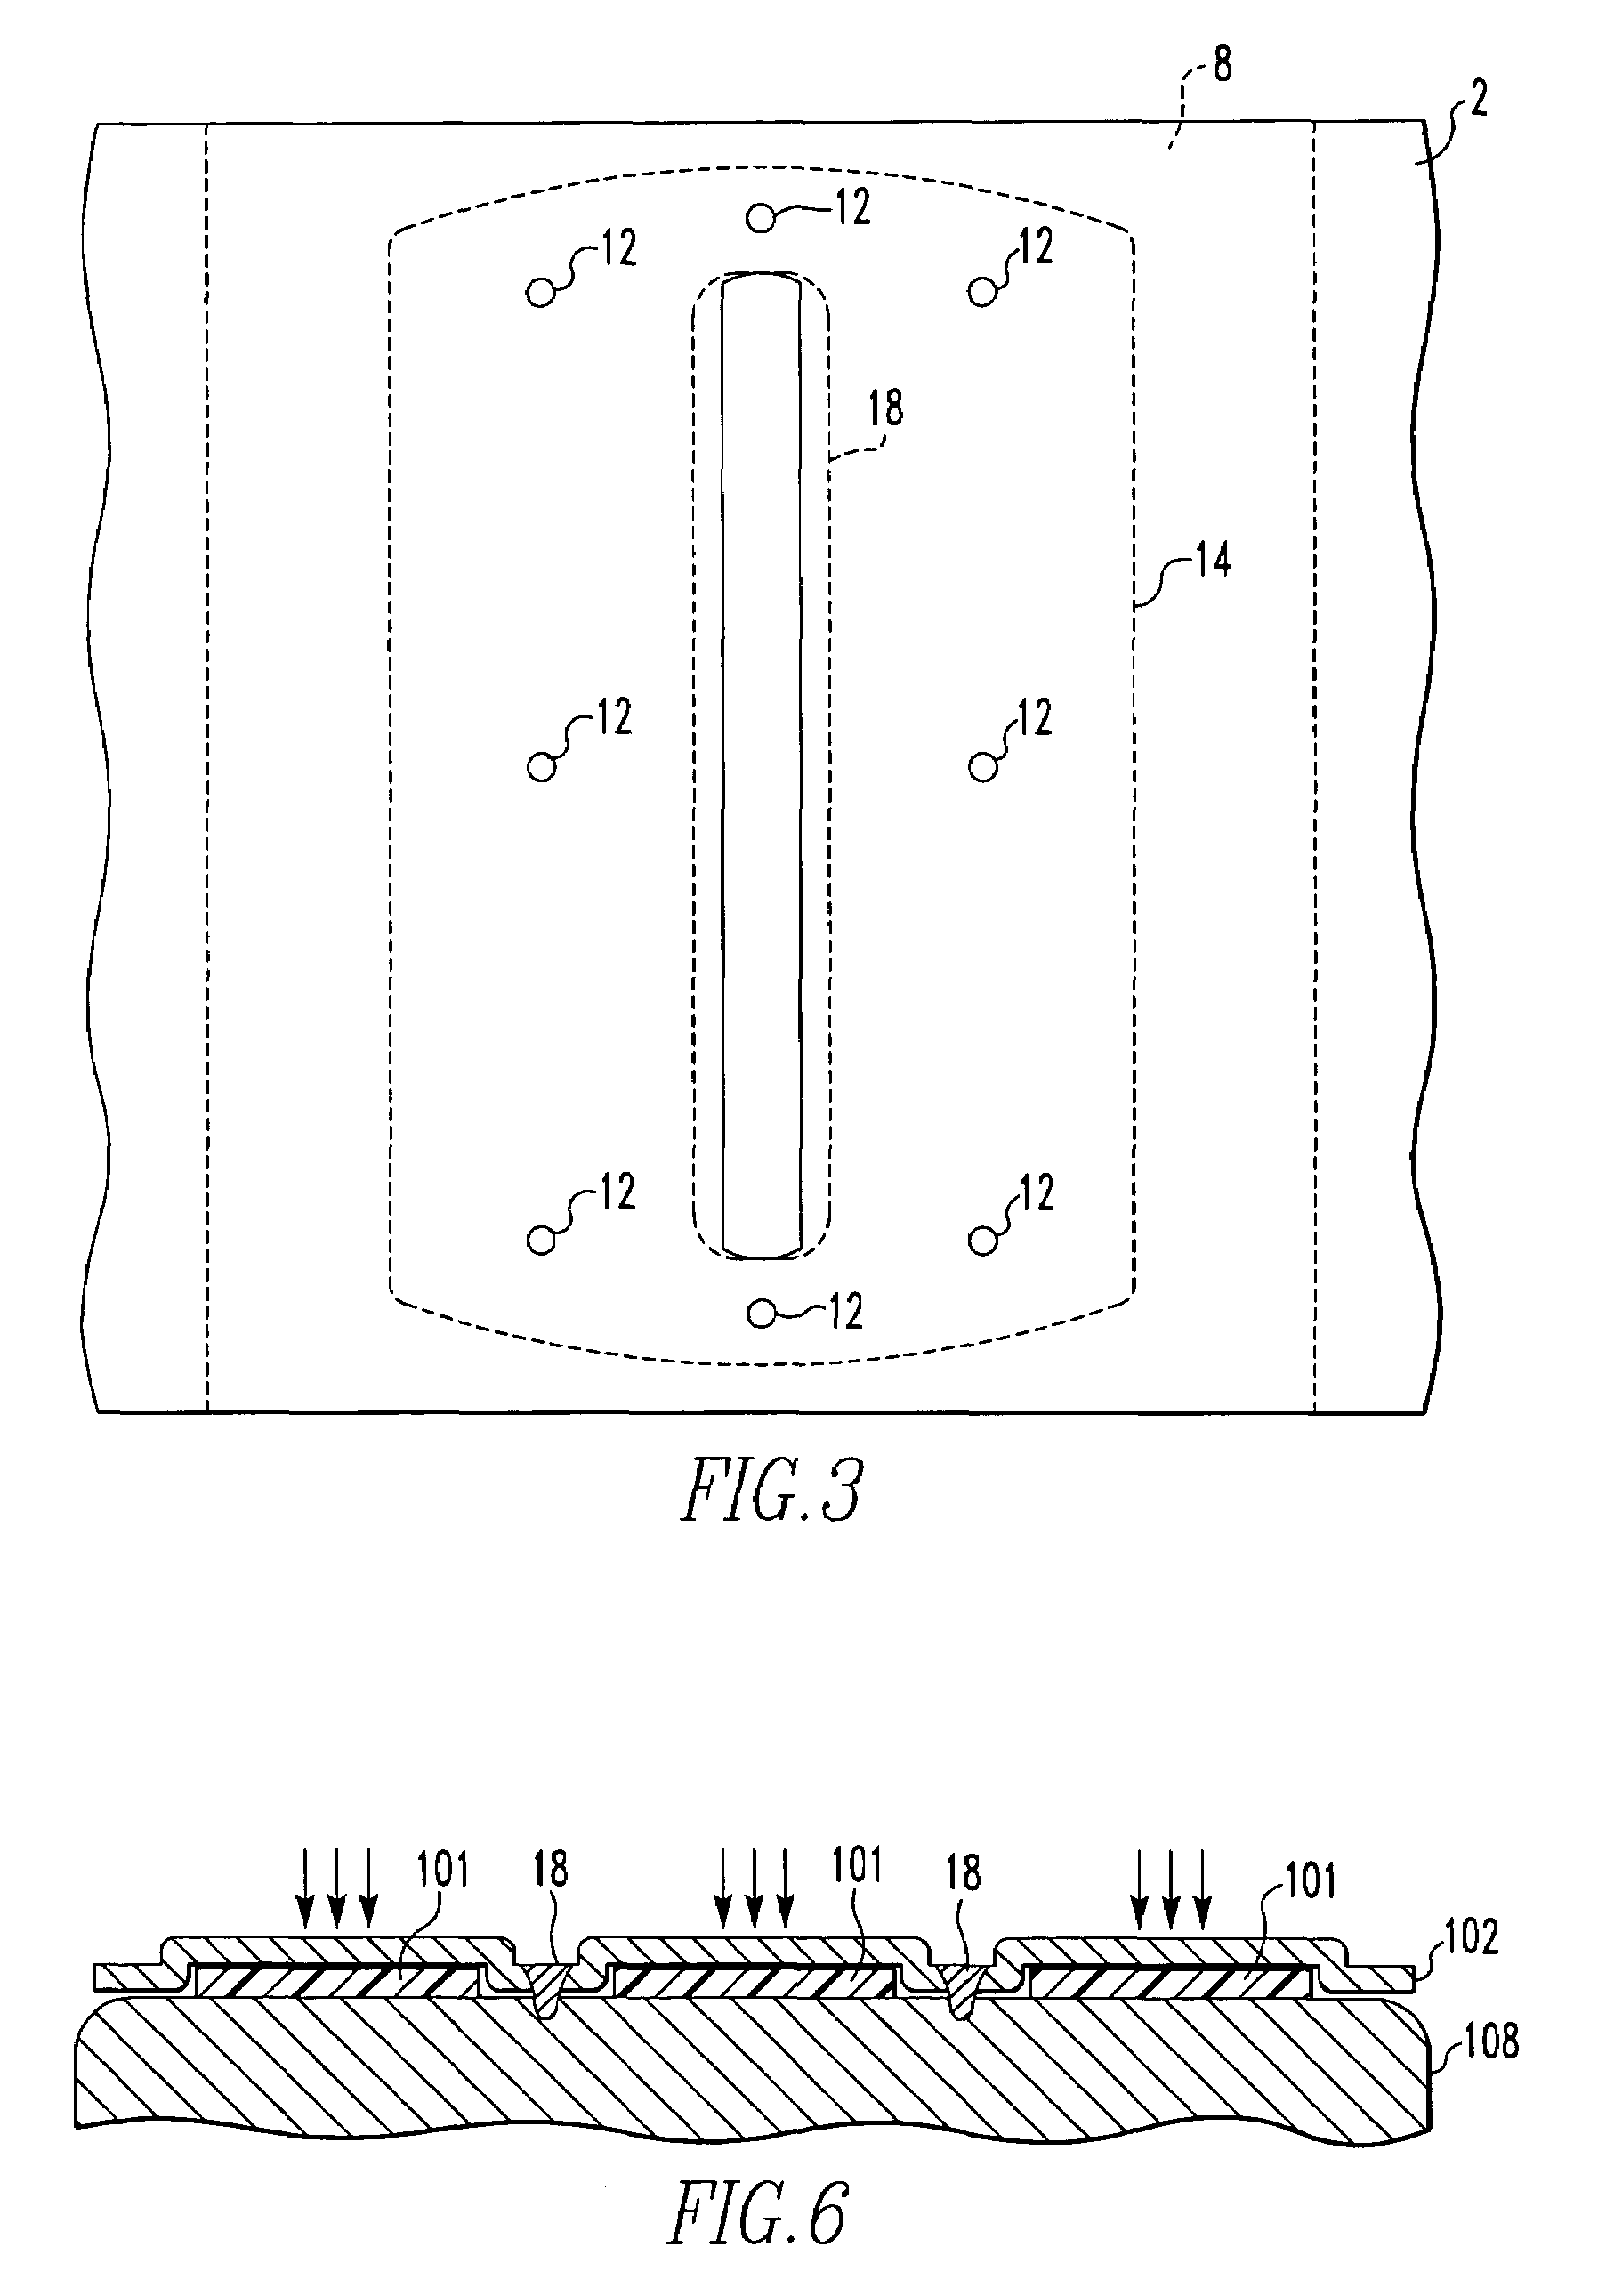 Method of combining welding and adhesive bonding for joining metal components